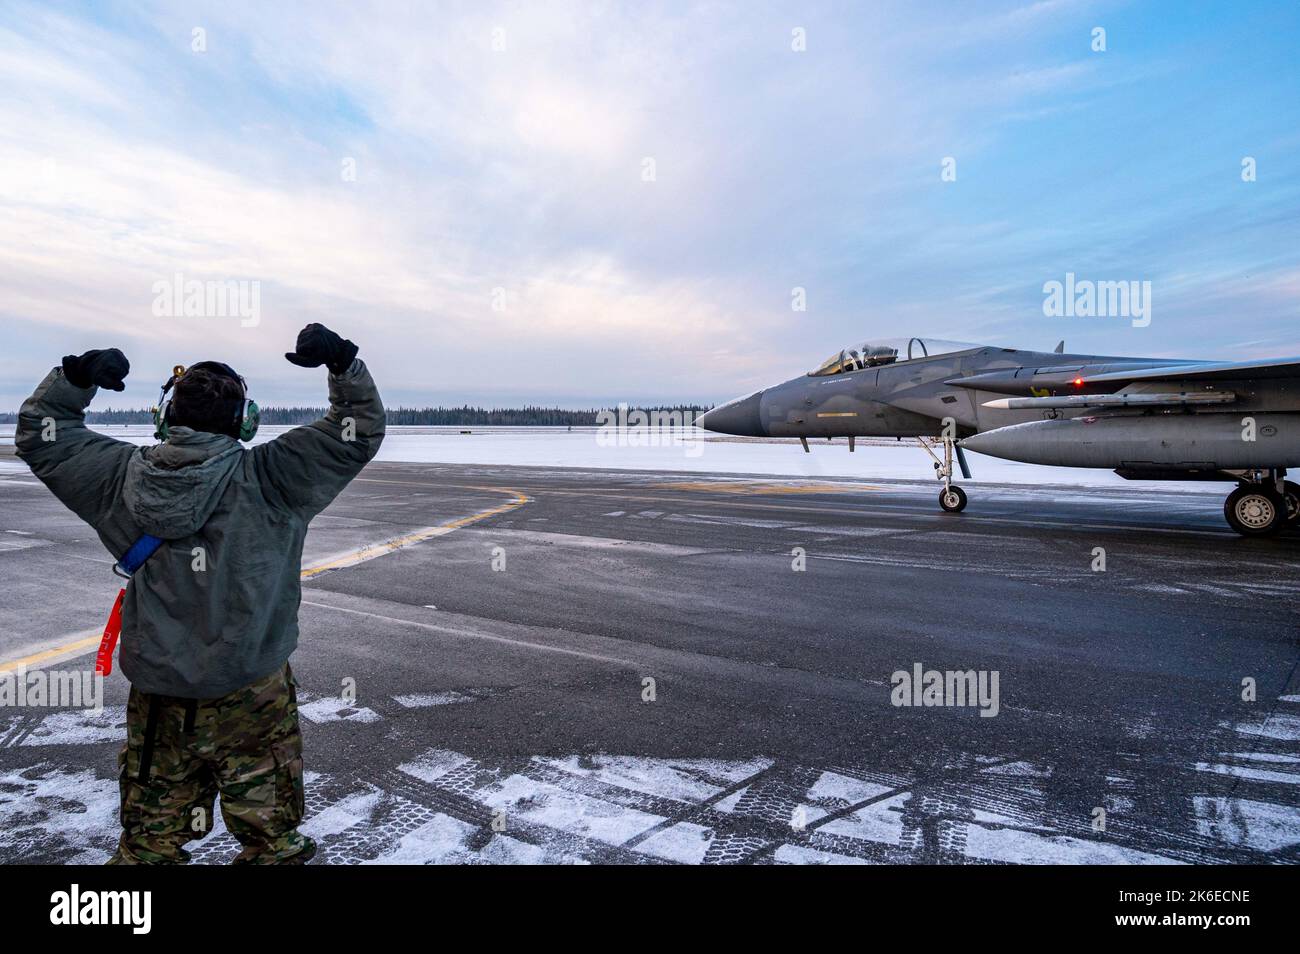 U.S. Air Force Airman 1st Class Kyle Netanel, 44th Aircraft Maintenance Unit crew chief, sends off an F-15C/D Eagle during RED FLAG-Alaska (RF-A) 23-1 at Eielson Air Force Base, Alaska, Oct. 12, 2022. RF-A is a two-week advanced aerial combat training exercise that aims to offer realistic air-combat training for military pilots and other flight crew members from the United States and allied countries. (U.S. Air Force photo by Senior Airman David Phaff) Stock Photo